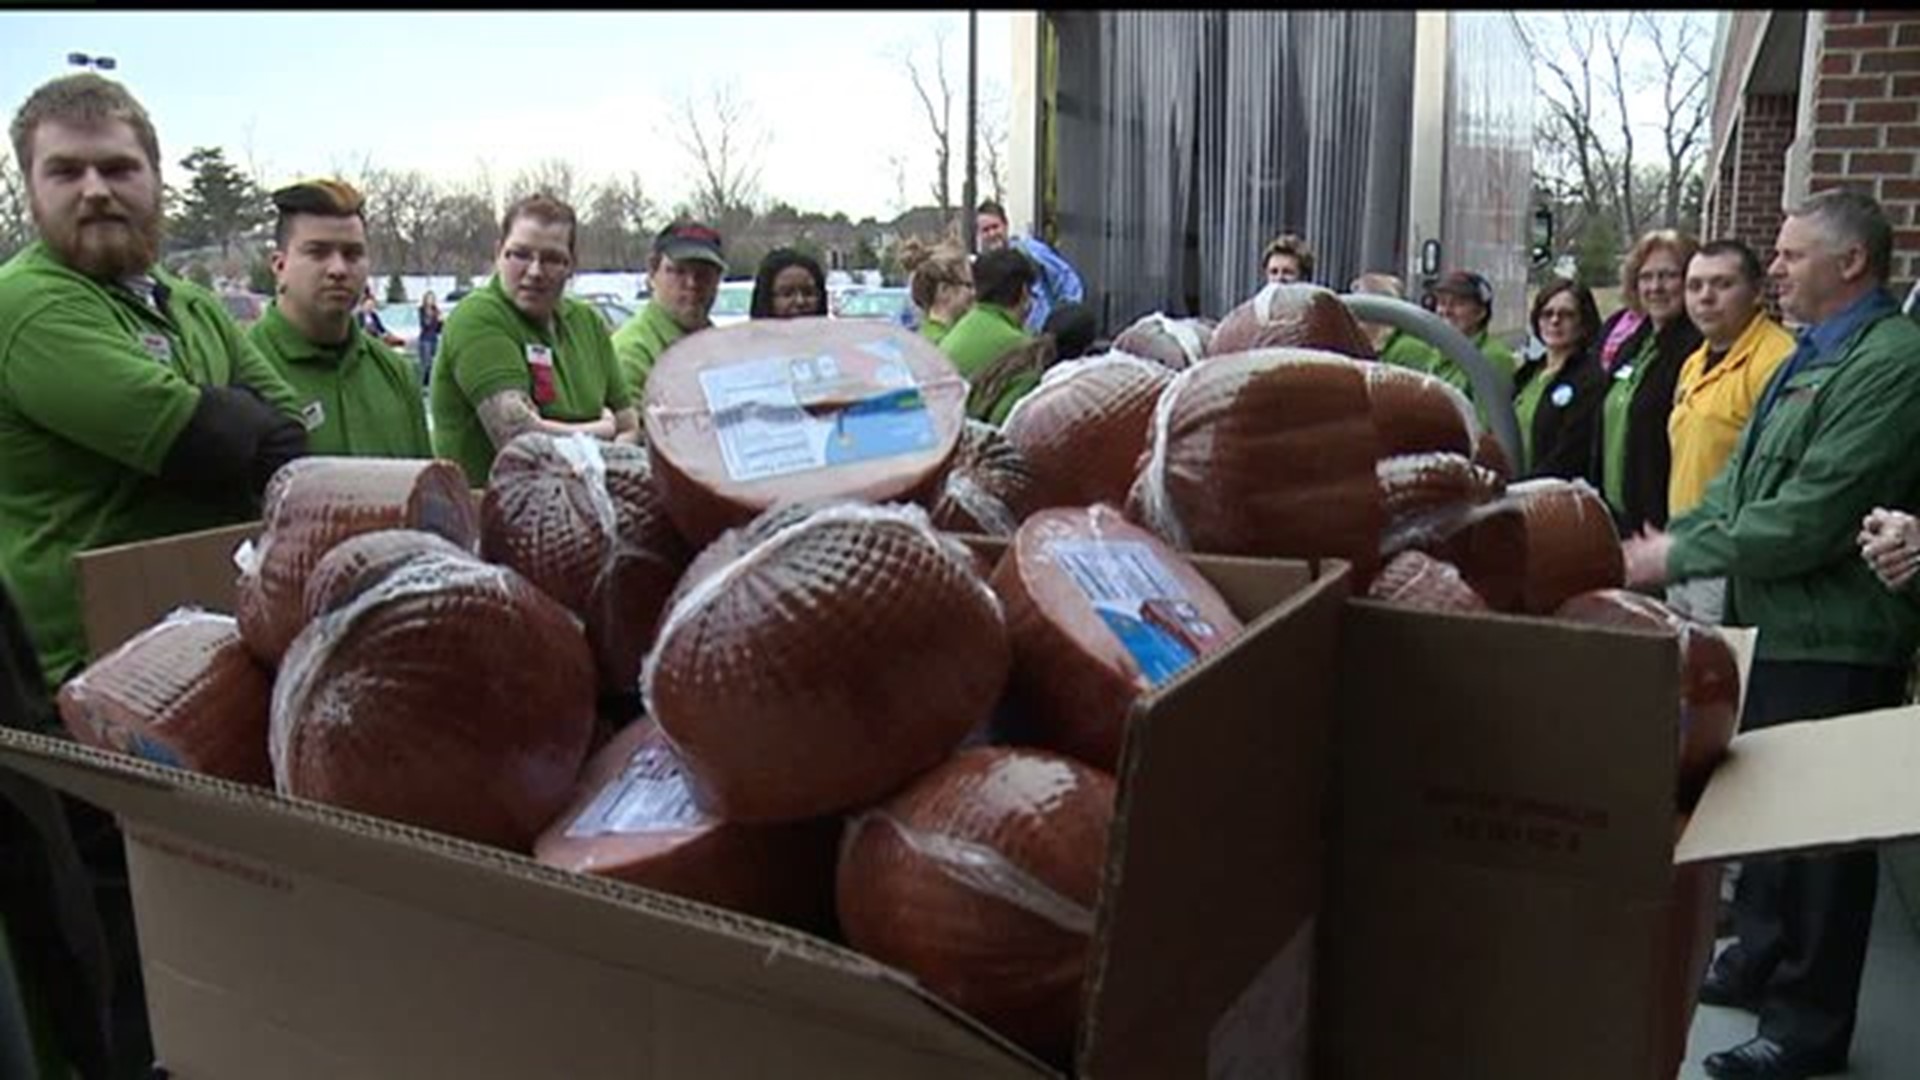 Hams donated to Central PA Food Bank by Giant Foods